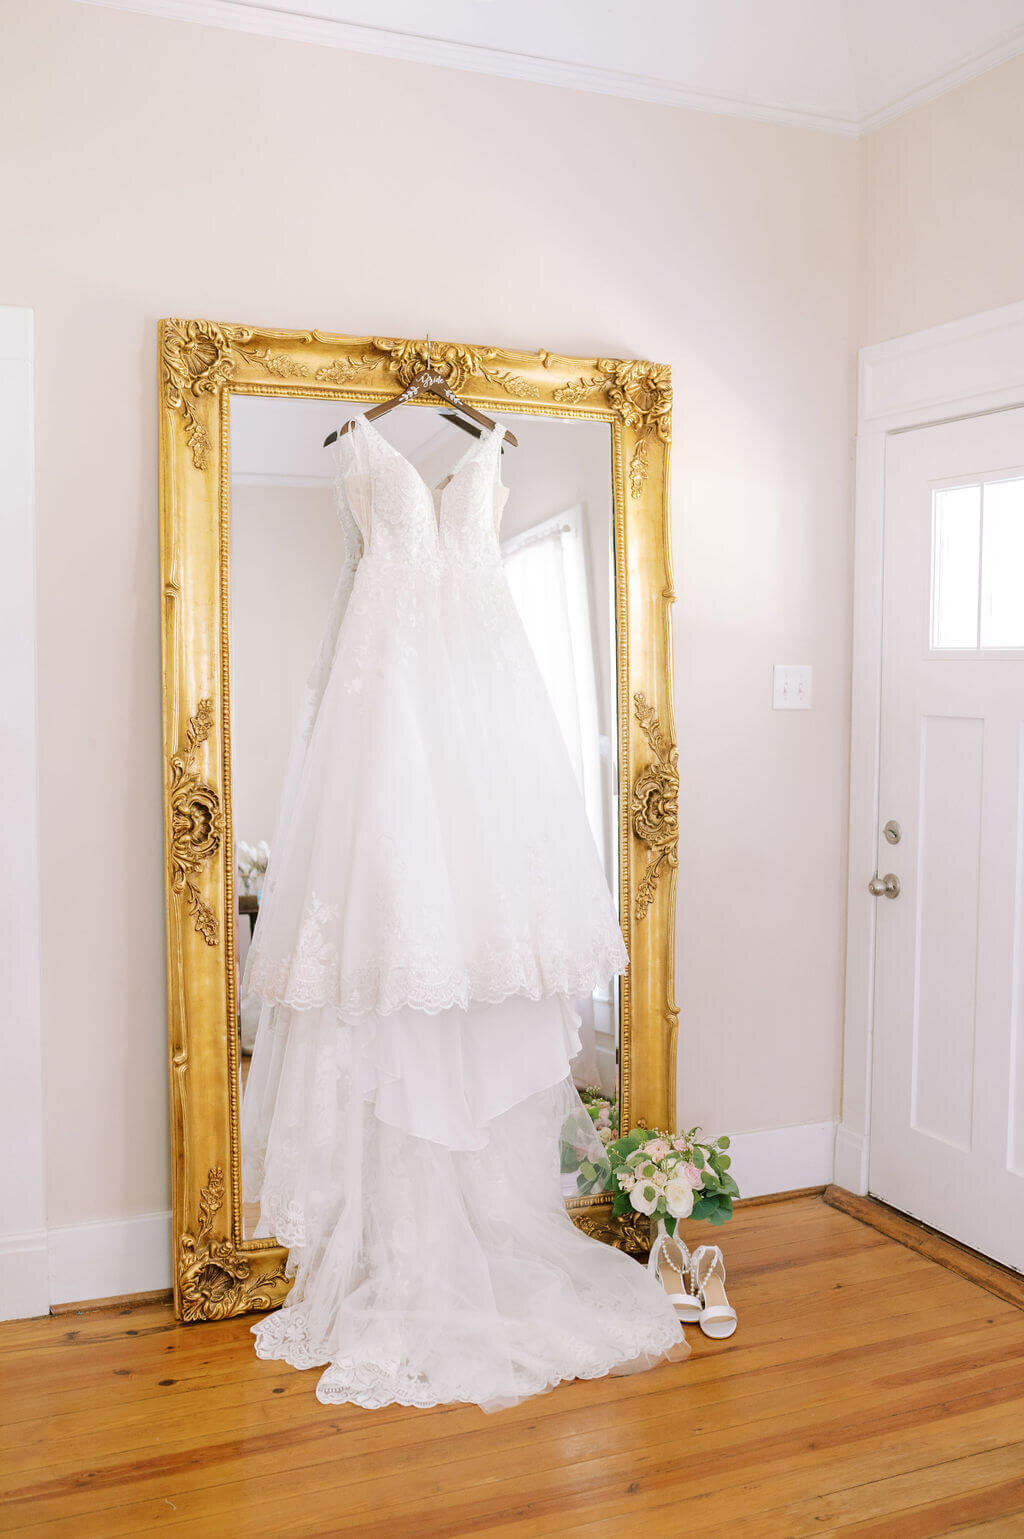 Wedding dress hanging up in front of mirror